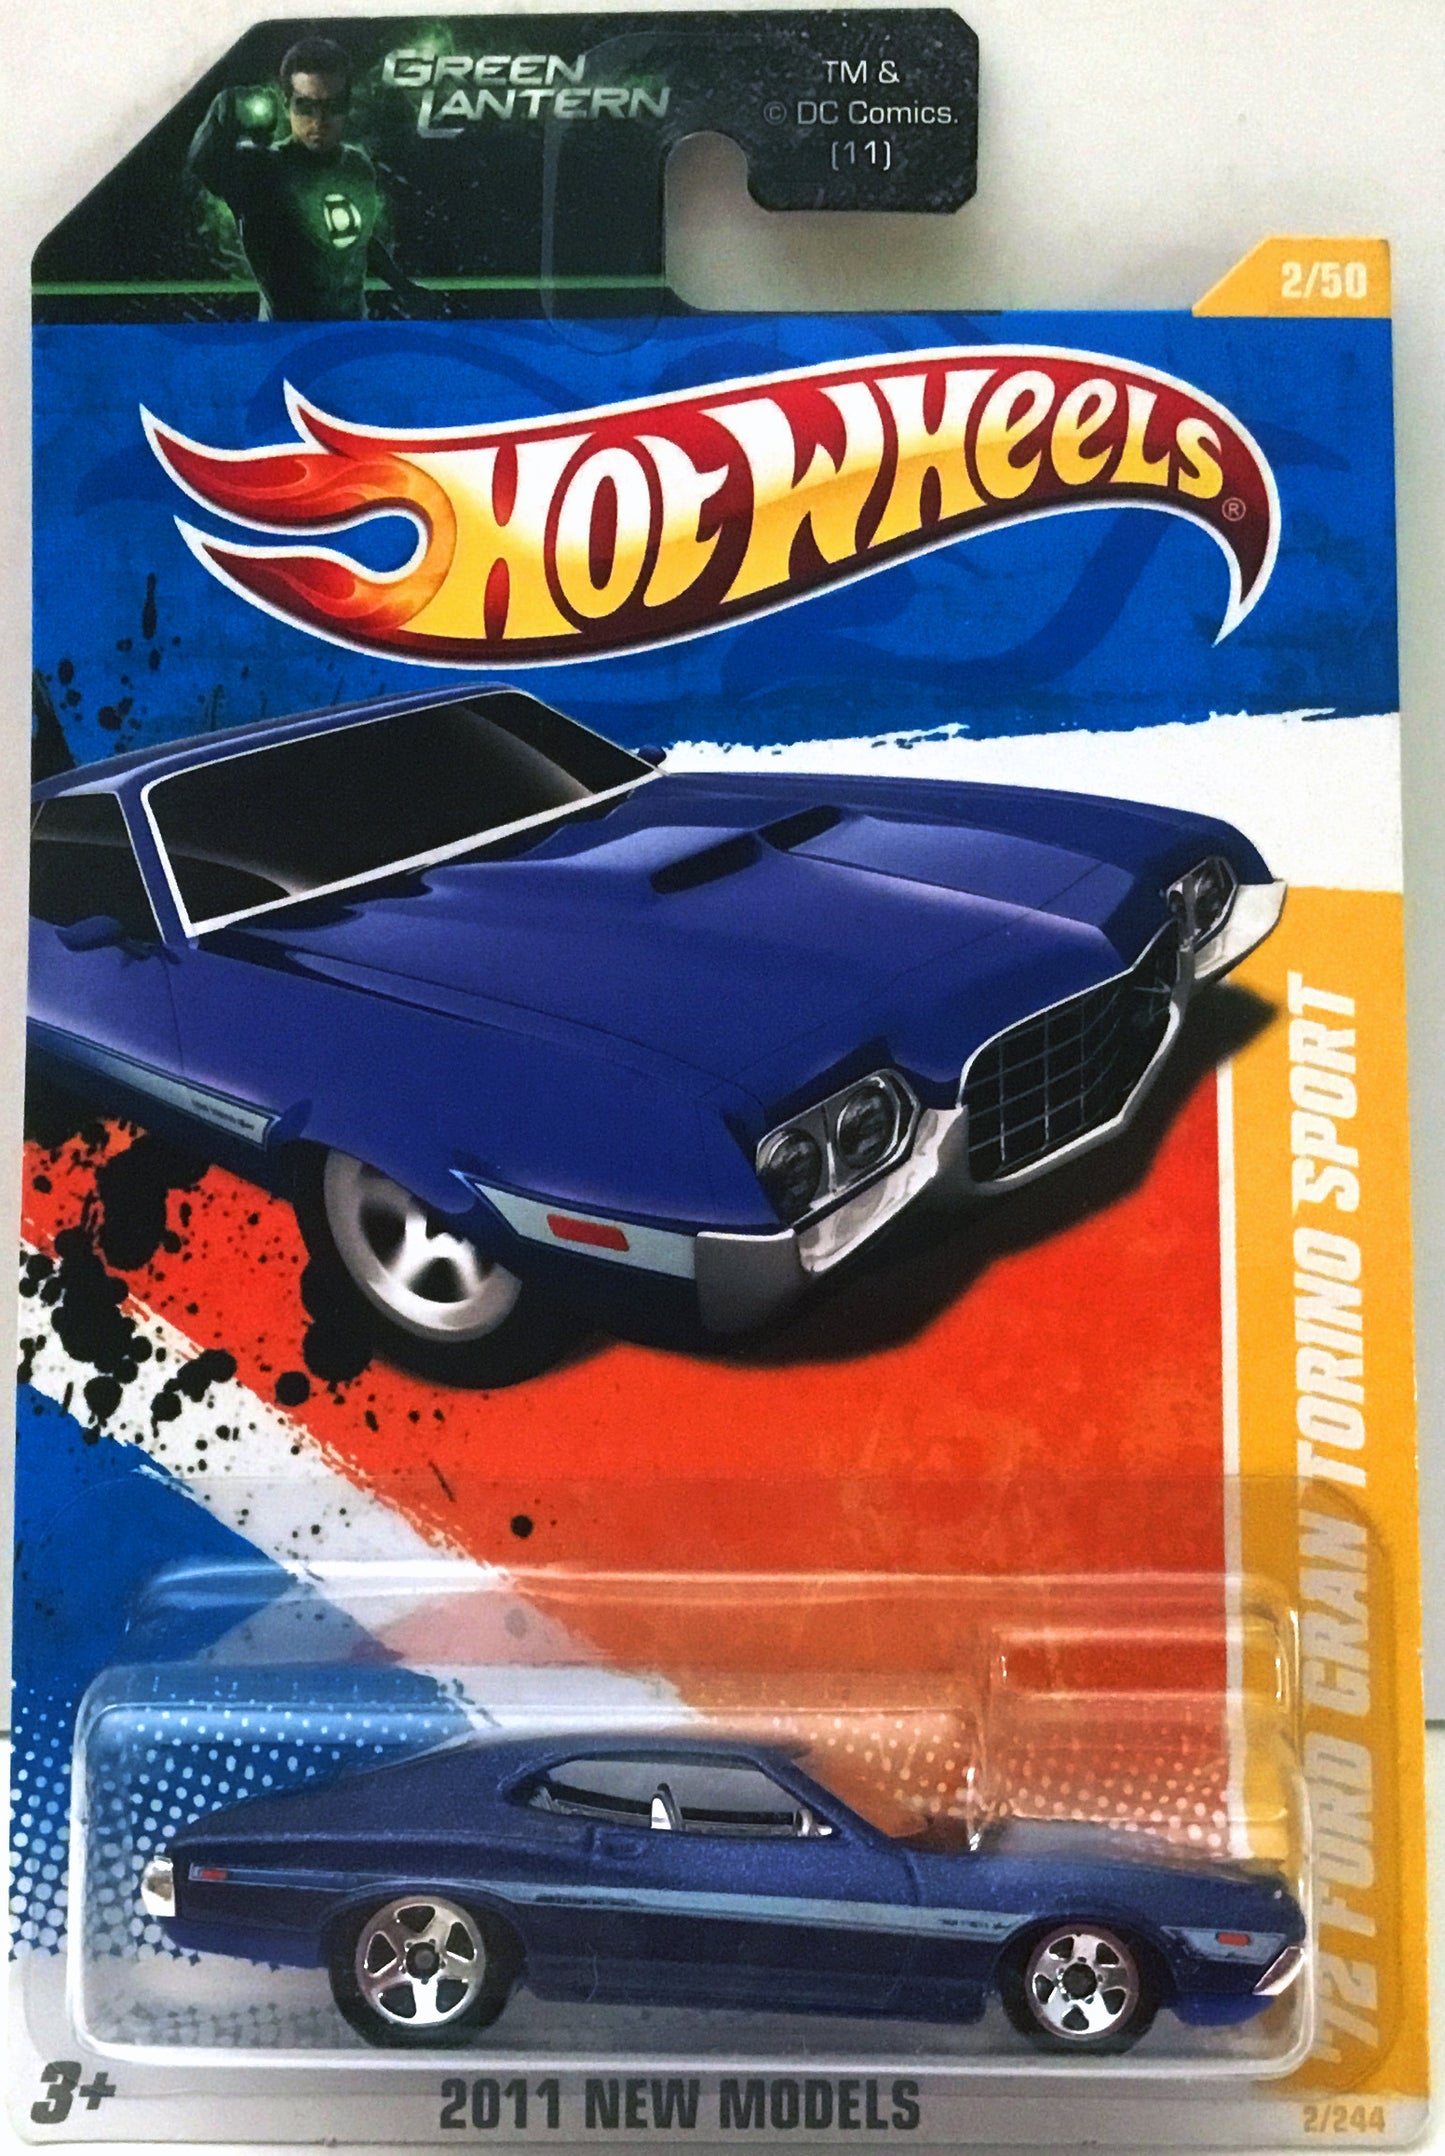 Hot Wheels 2011 - Collector # 002/244 - New Models 02/50 -&nbsp;'72 Ford Gran Torino Sport - Blue - USA Card with 'Green Lantern' Promo